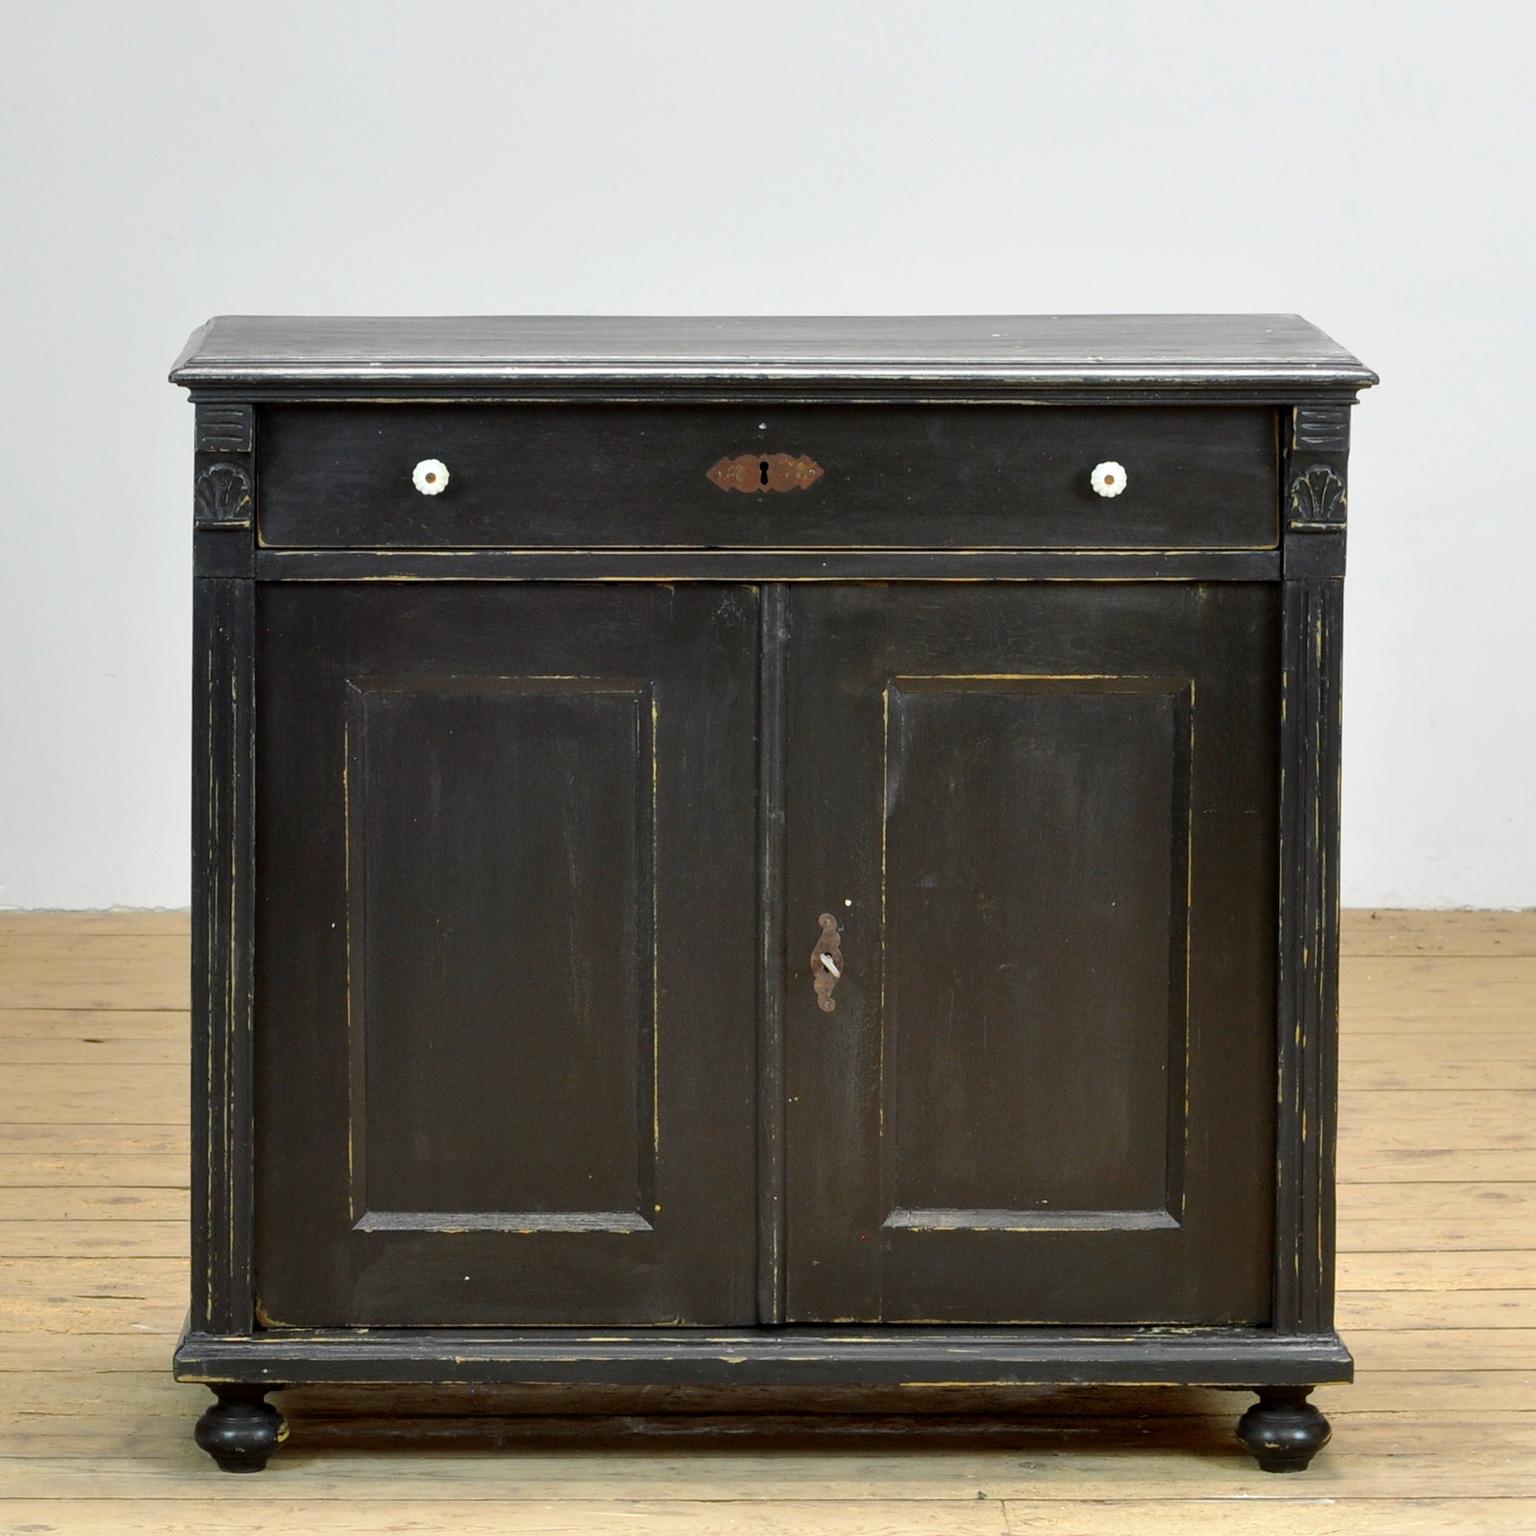 Dresser from around 1910. Made of pine wood. The cabinet has its original paint with a beautiful patina. The cabinet has a well-functioning lock with key. This cabinet has been cleaned and treated against woodworm. A beautiful and practical piece of